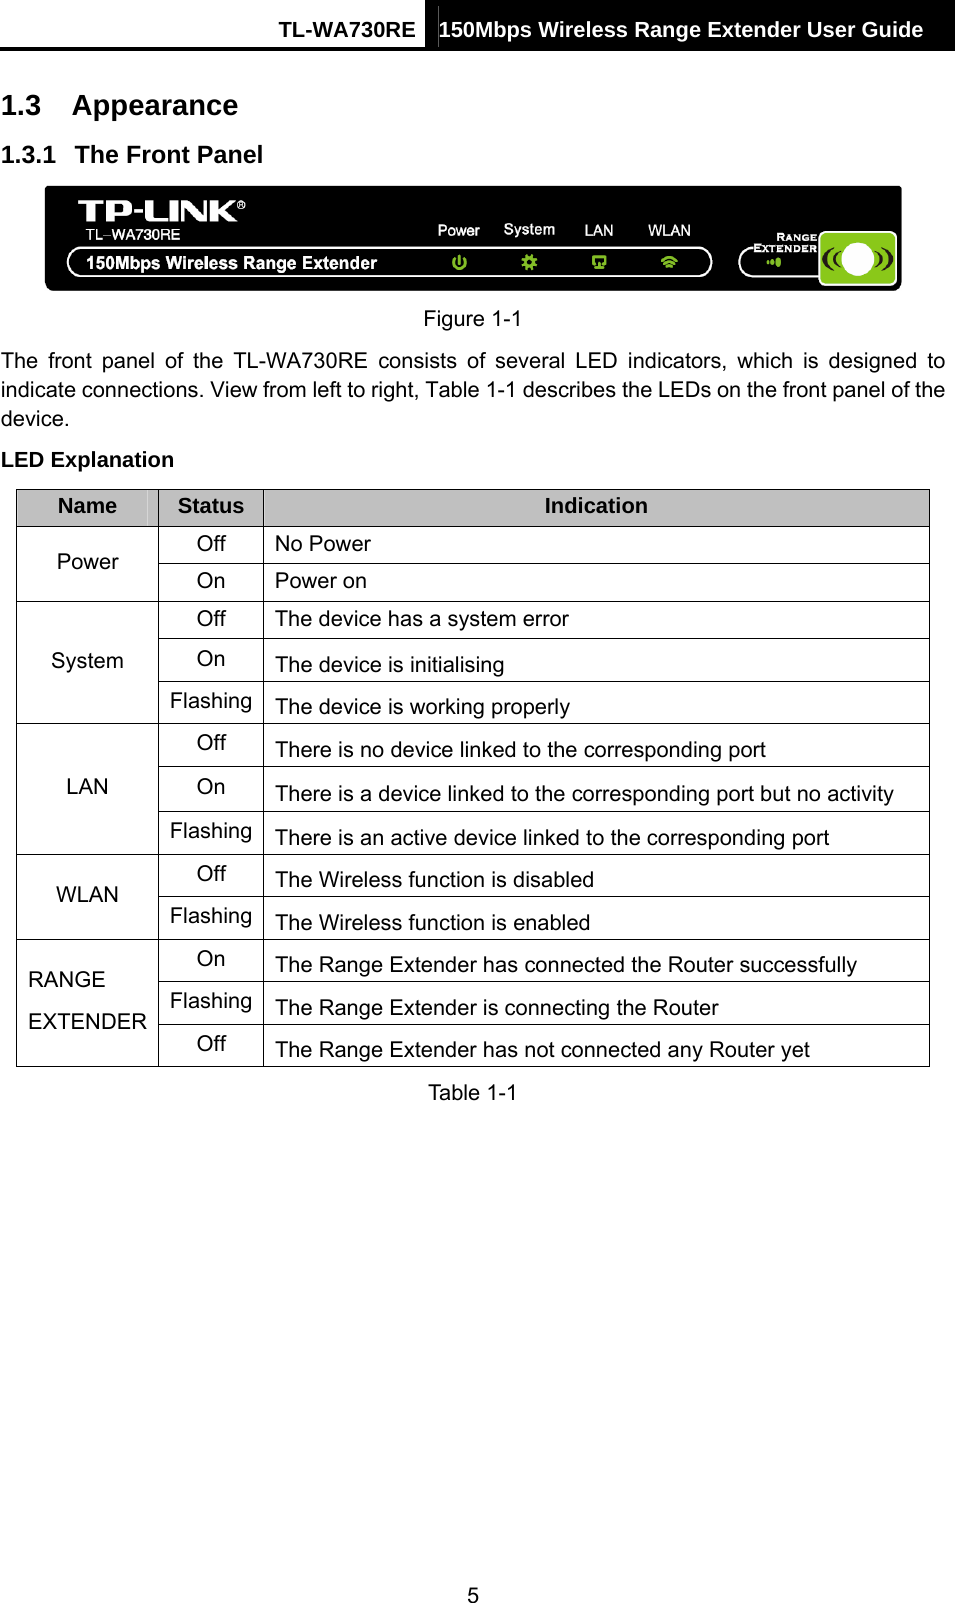 TL-WA730RE 150Mbps Wireless Range Extender User Guide  1.3  Appearance 1.3.1  The Front Panel  Figure 1-1 The front panel of the TL-WA730RE consists of several LED indicators, which is designed to indicate connections. View from left to right, Table 1-1 describes the LEDs on the front panel of the device. LED Explanation Name  Status  Indication Off No Power Power  On Power on Off  The device has a system error On  The device is initialising System Flashing  The device is working properly Off  There is no device linked to the corresponding port On  There is a device linked to the corresponding port but no activity LAN Flashing  There is an active device linked to the corresponding port Off  The Wireless function is disabled WLAN  Flashing  The Wireless function is enabled On  The Range Extender has connected the Router successfully Flashing  The Range Extender is connecting the Router   RANGE  EXTENDER  Off  The Range Extender has not connected any Router yet Table 1-1 5 